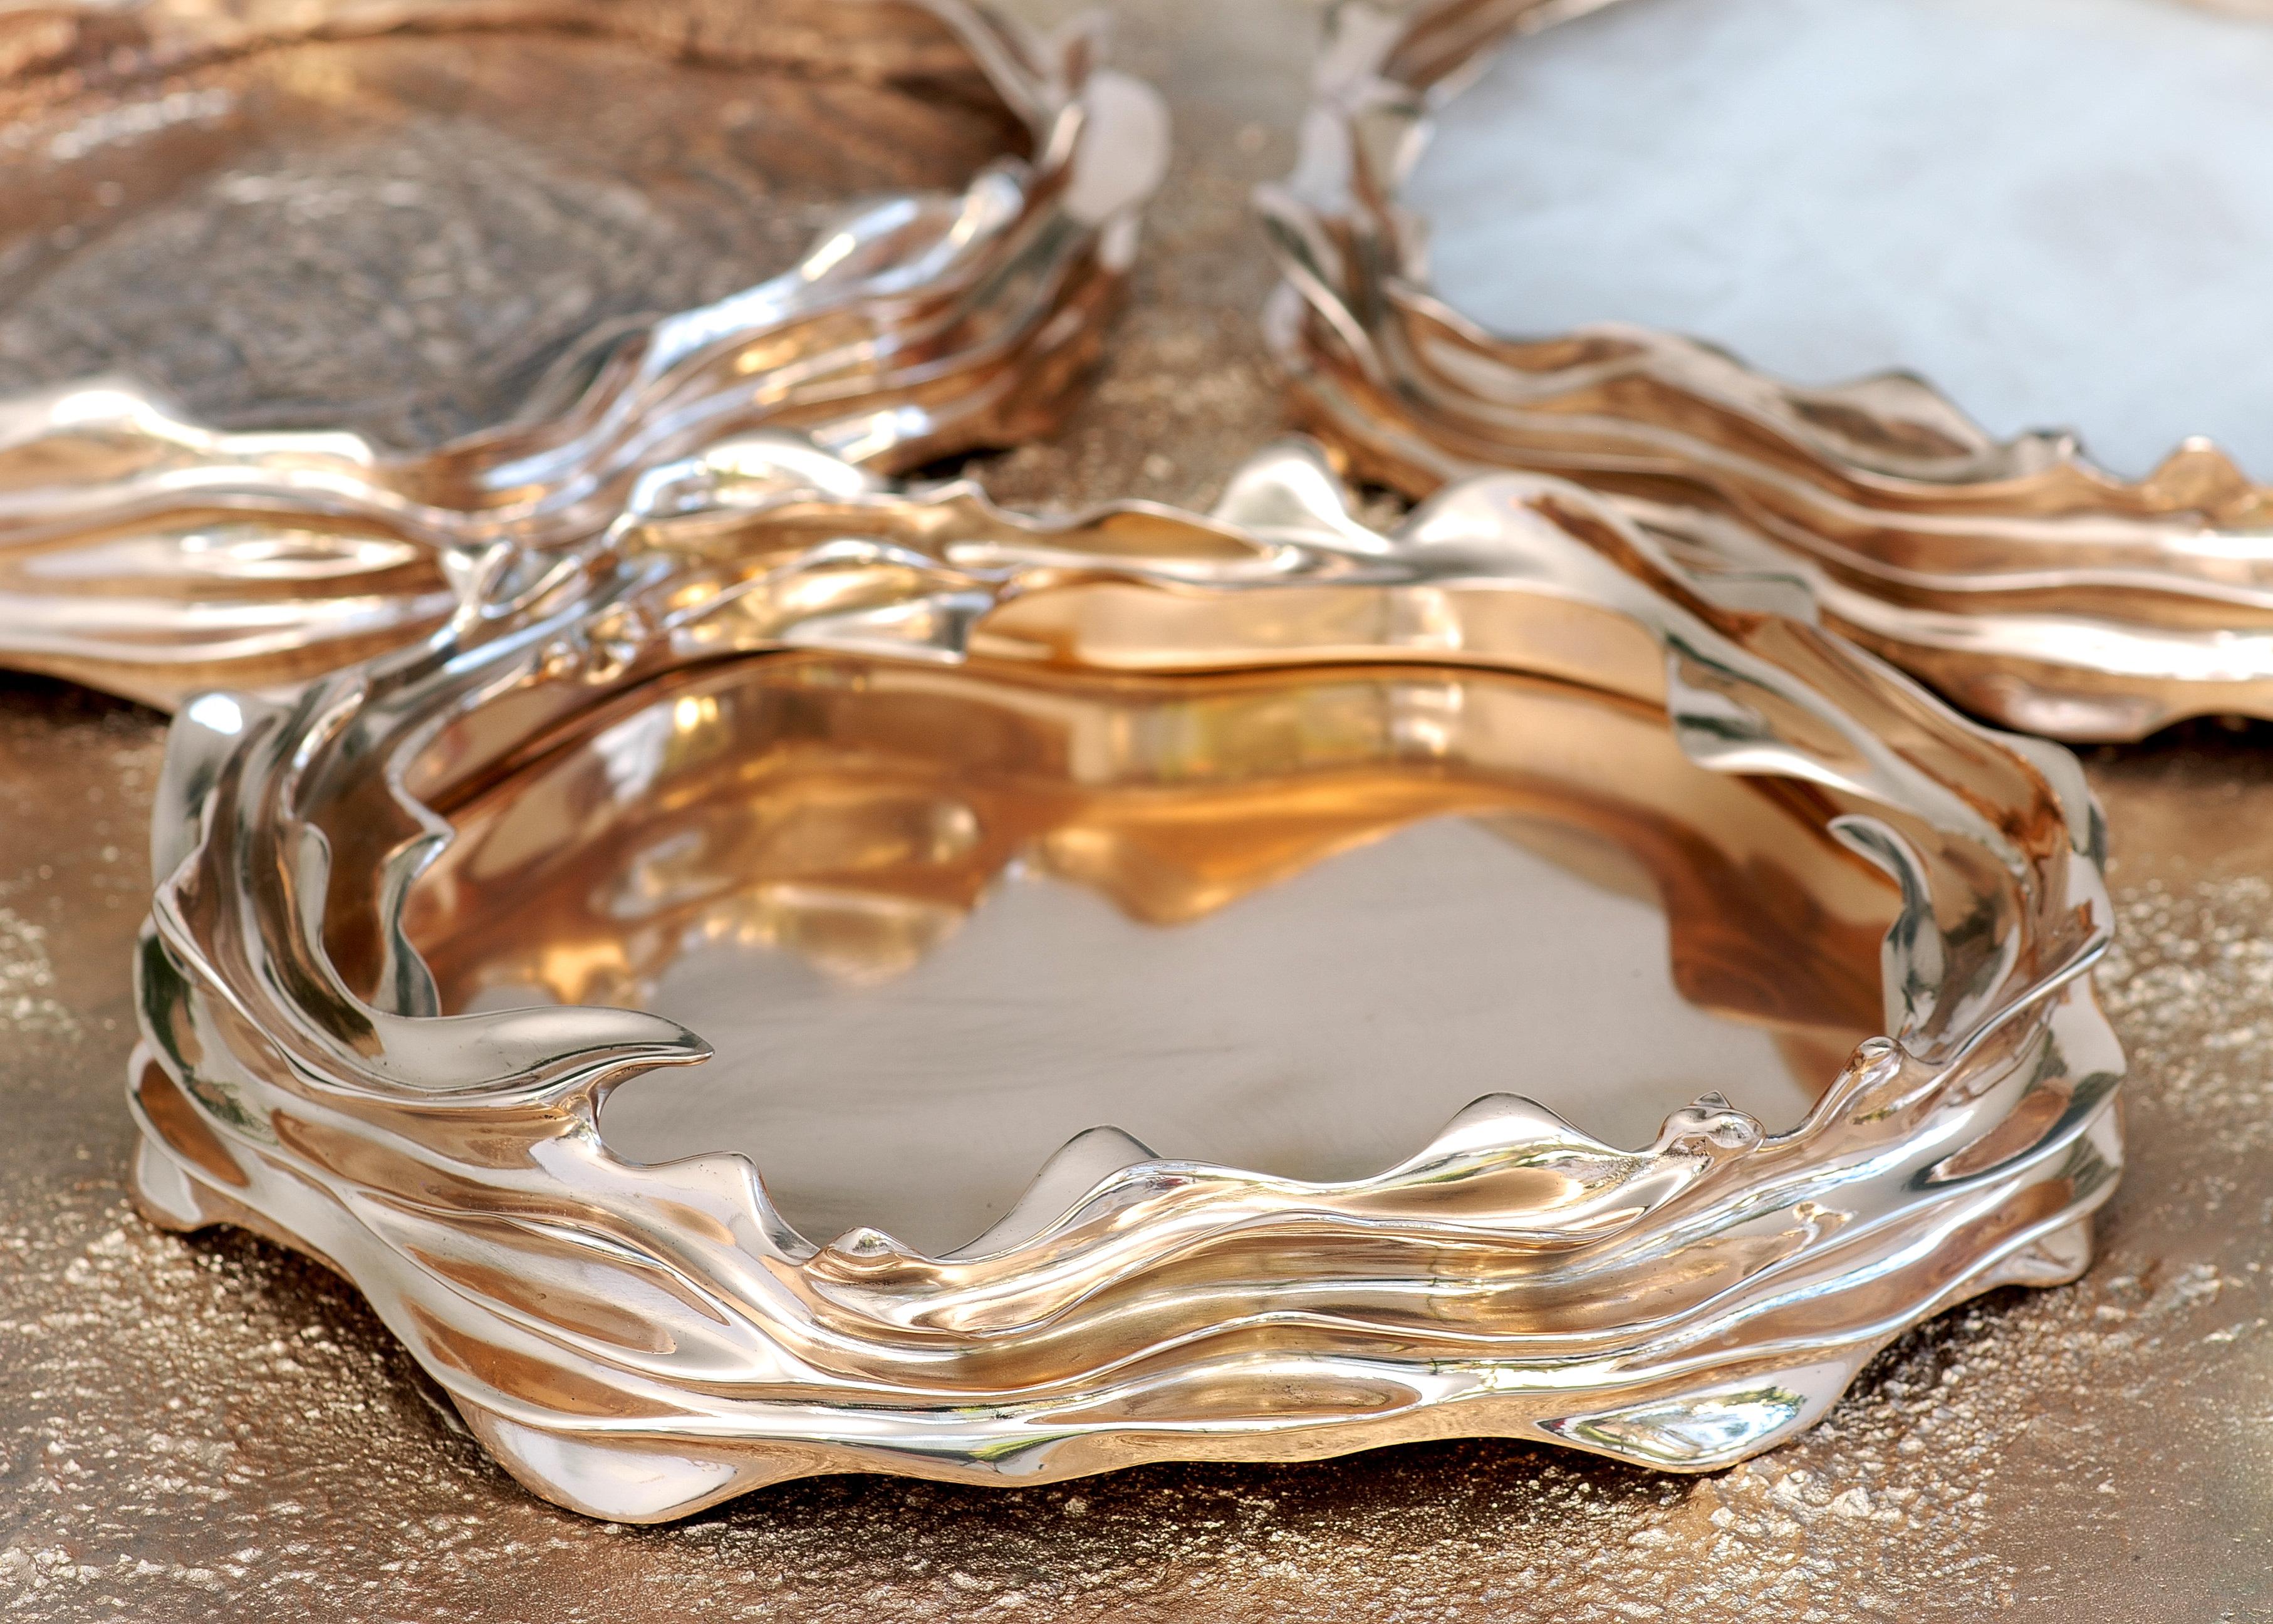 Centerpiece bowl in polished bronze by FAKASAKA Design
Dimensions: W 36 x D 30 x H 7 cm
Materials: Polished bronze.
   